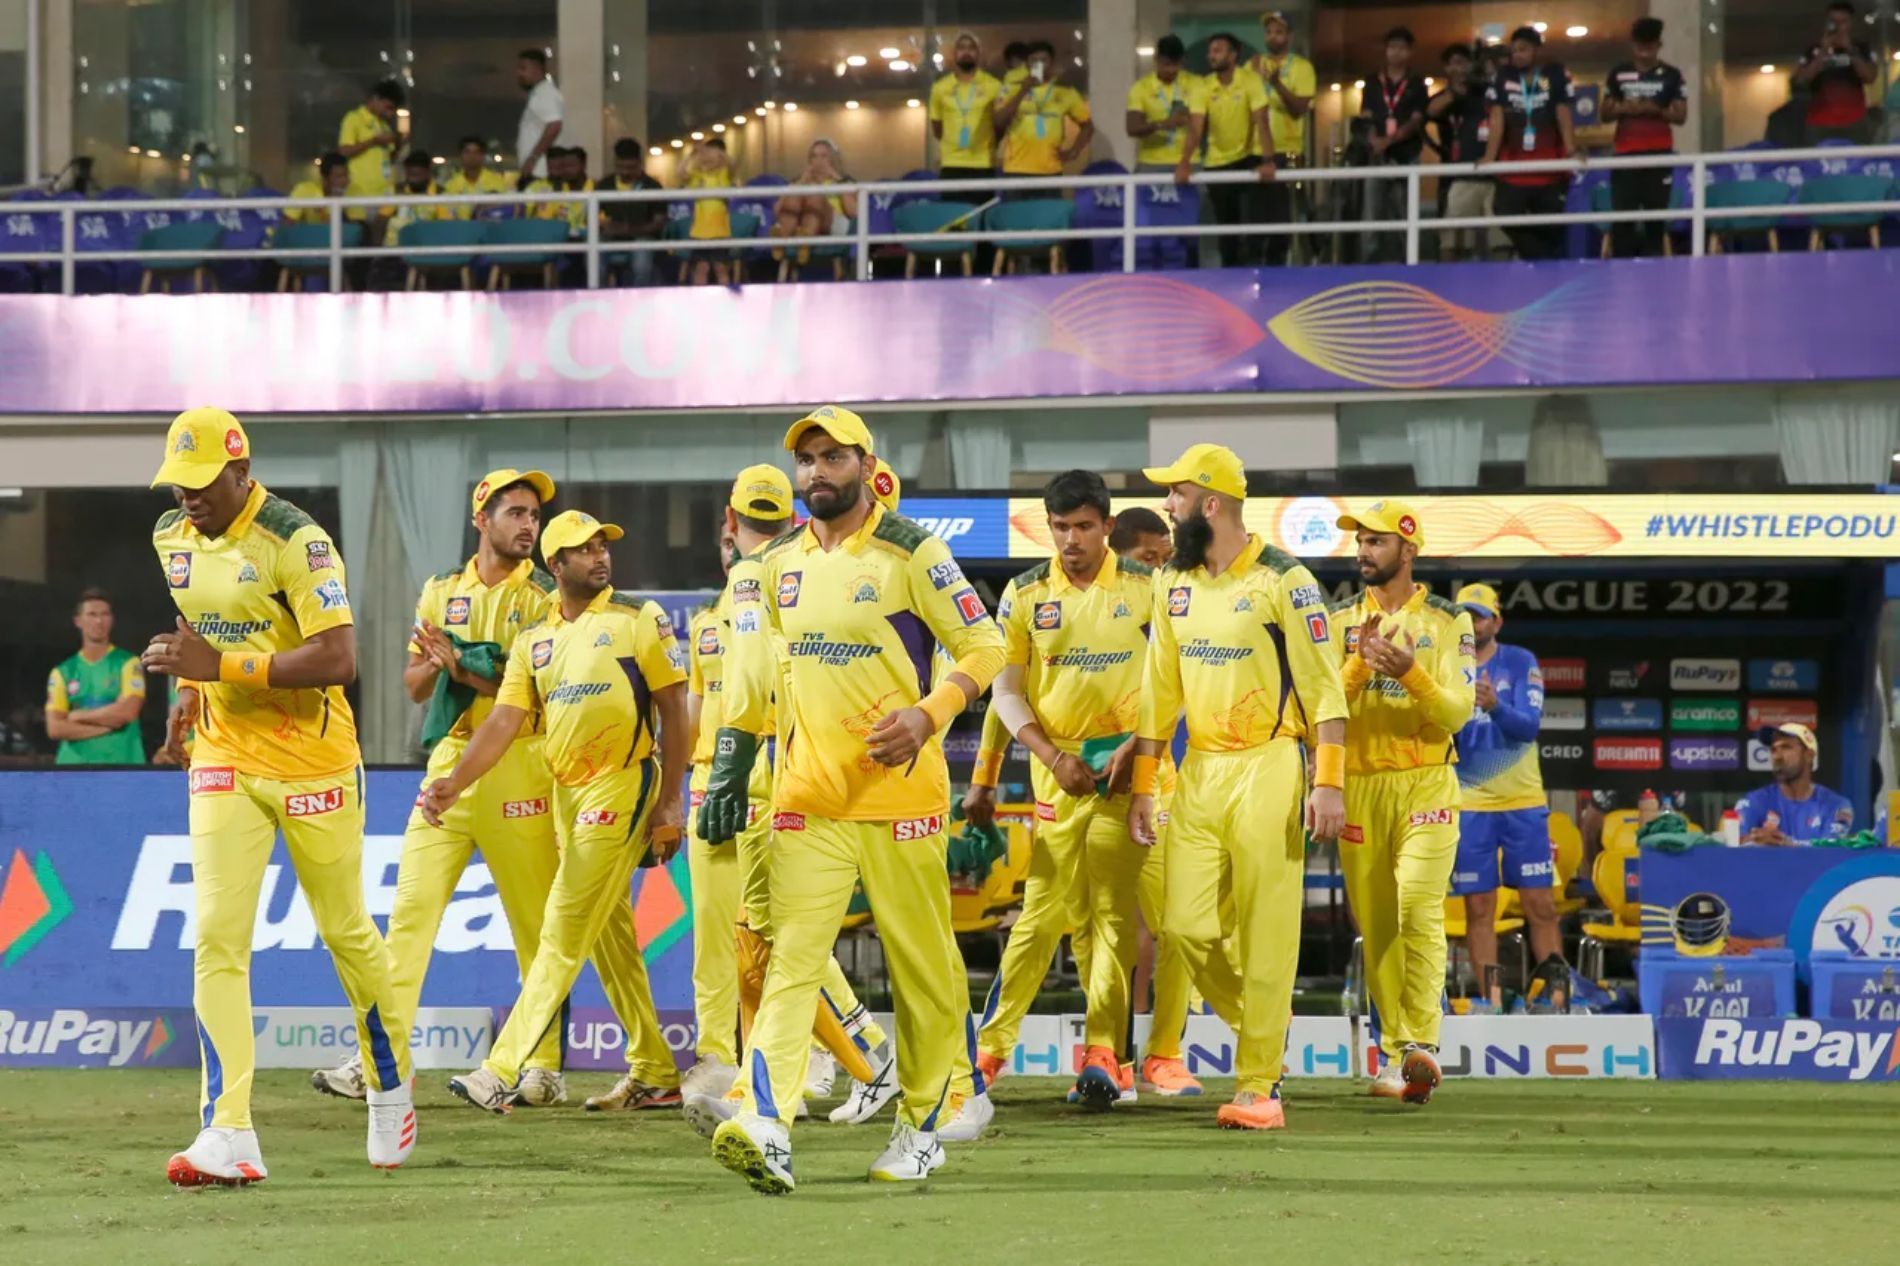 Ravindra Jadeja leading the side out to the middle. Pic: IPLT20.COM